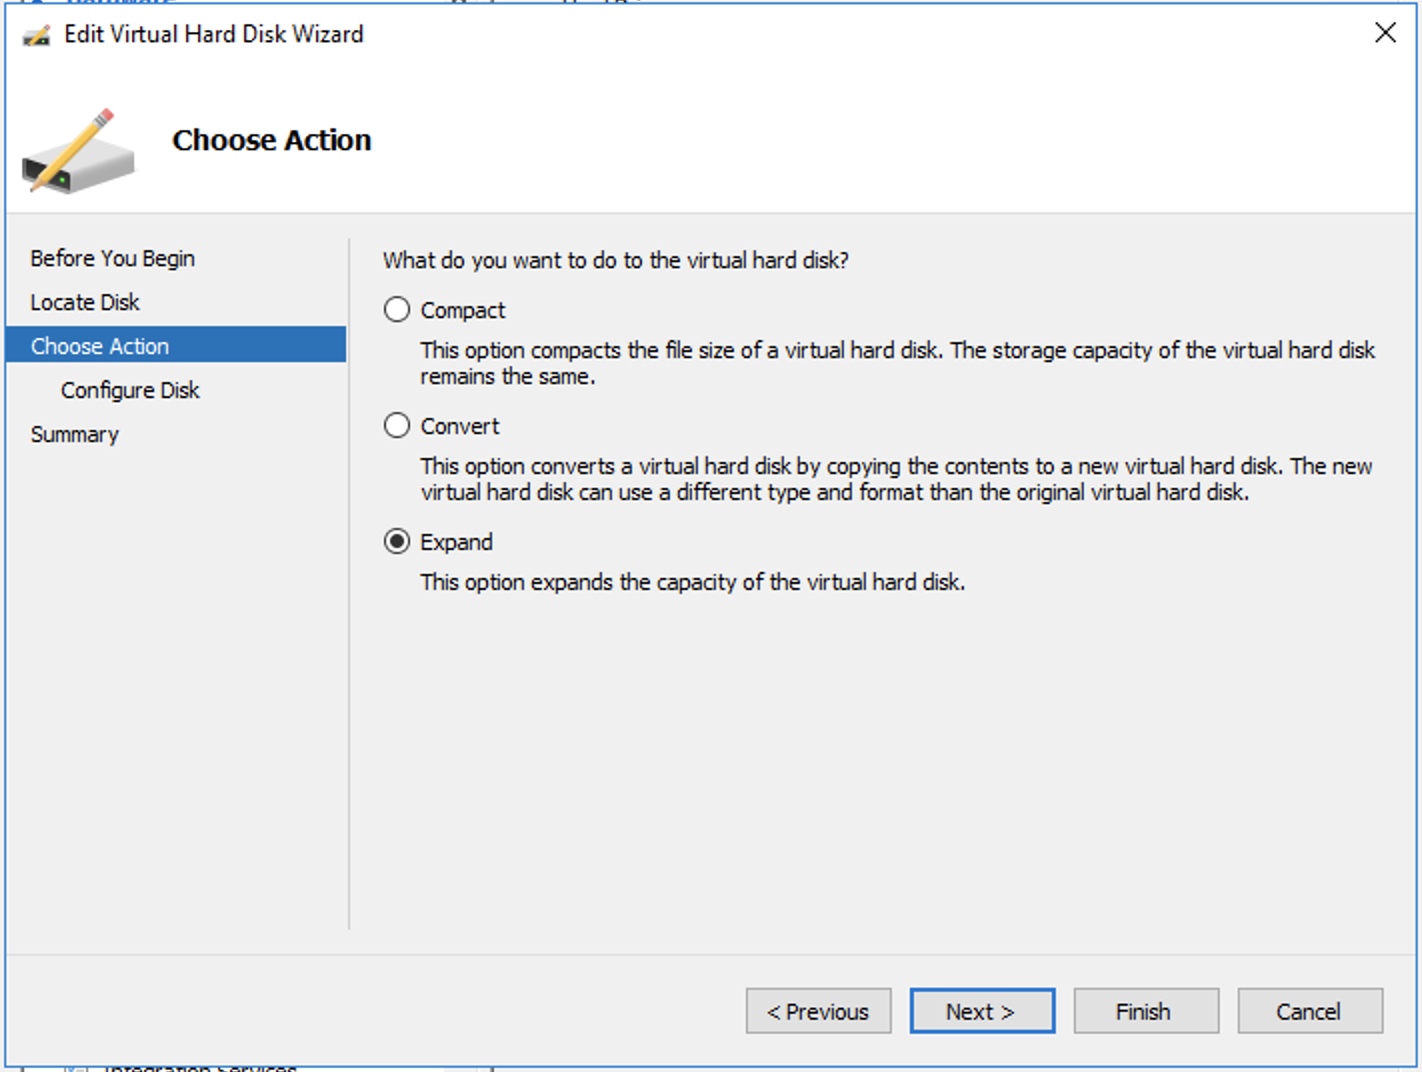 Editing the hard drive on Hyper-V: Choose Action page